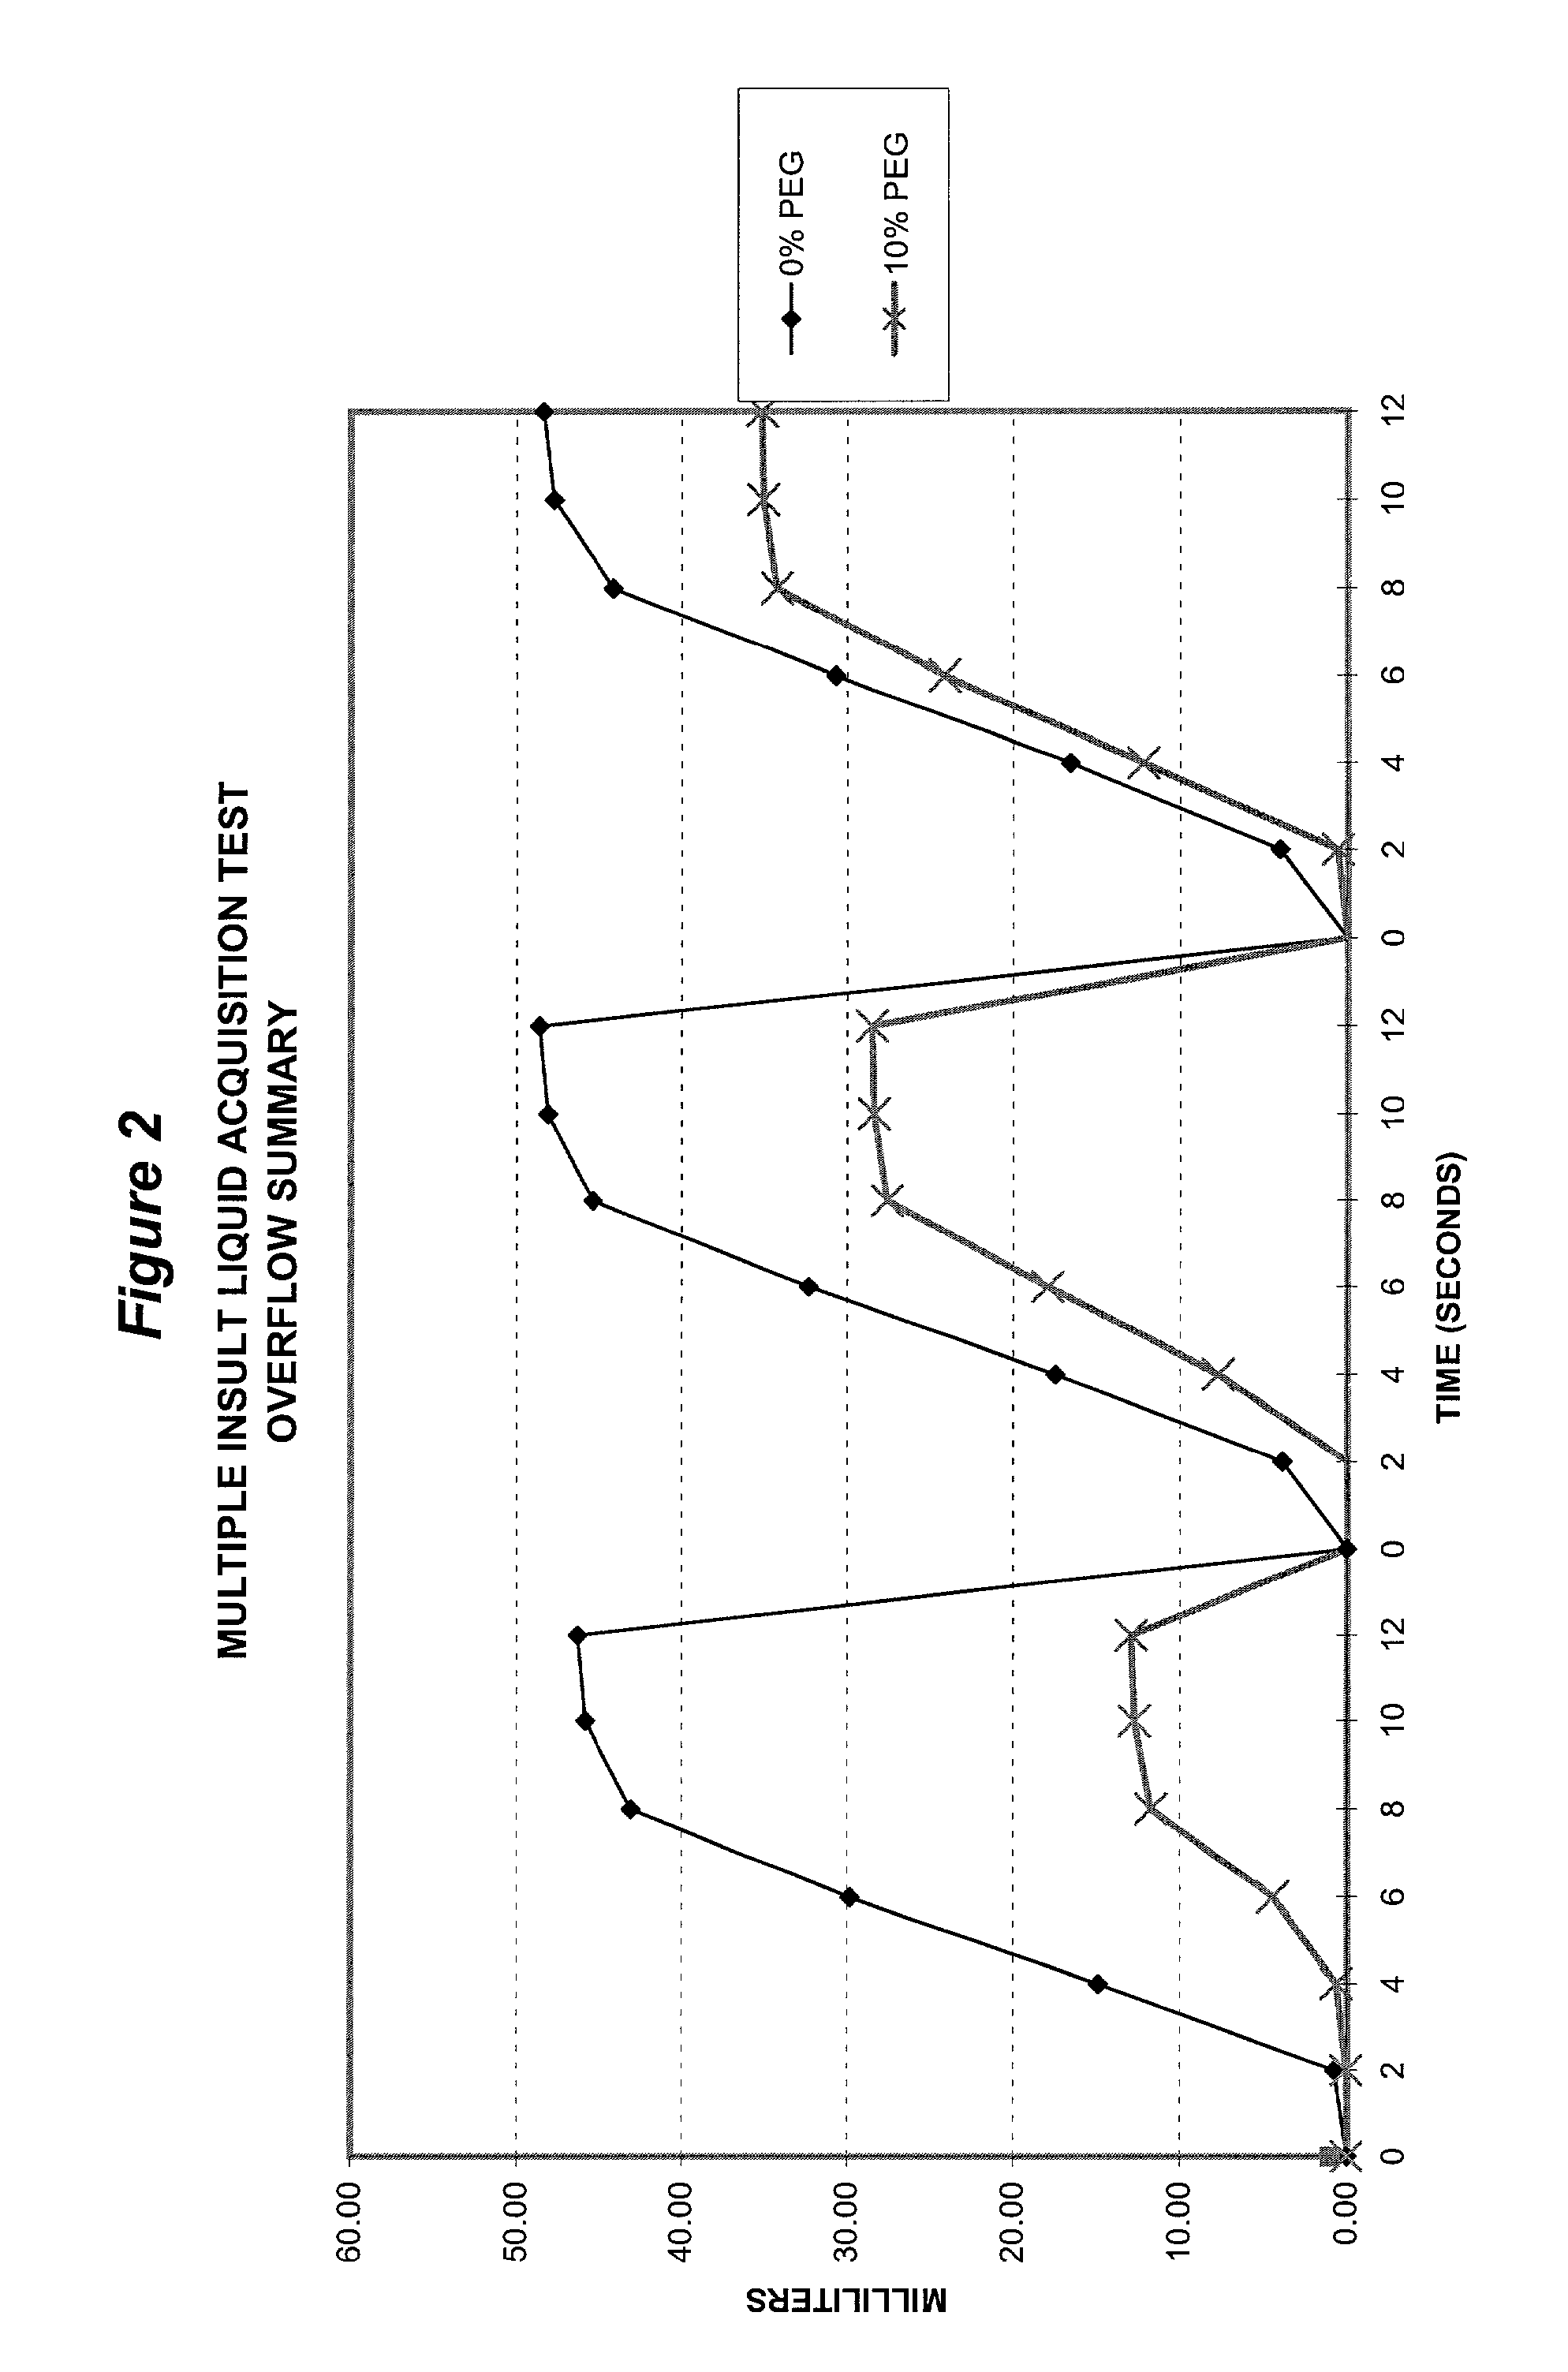 Nonwoven fabrics formed from polyethylene glycol modified polyester fibers and method for making the same